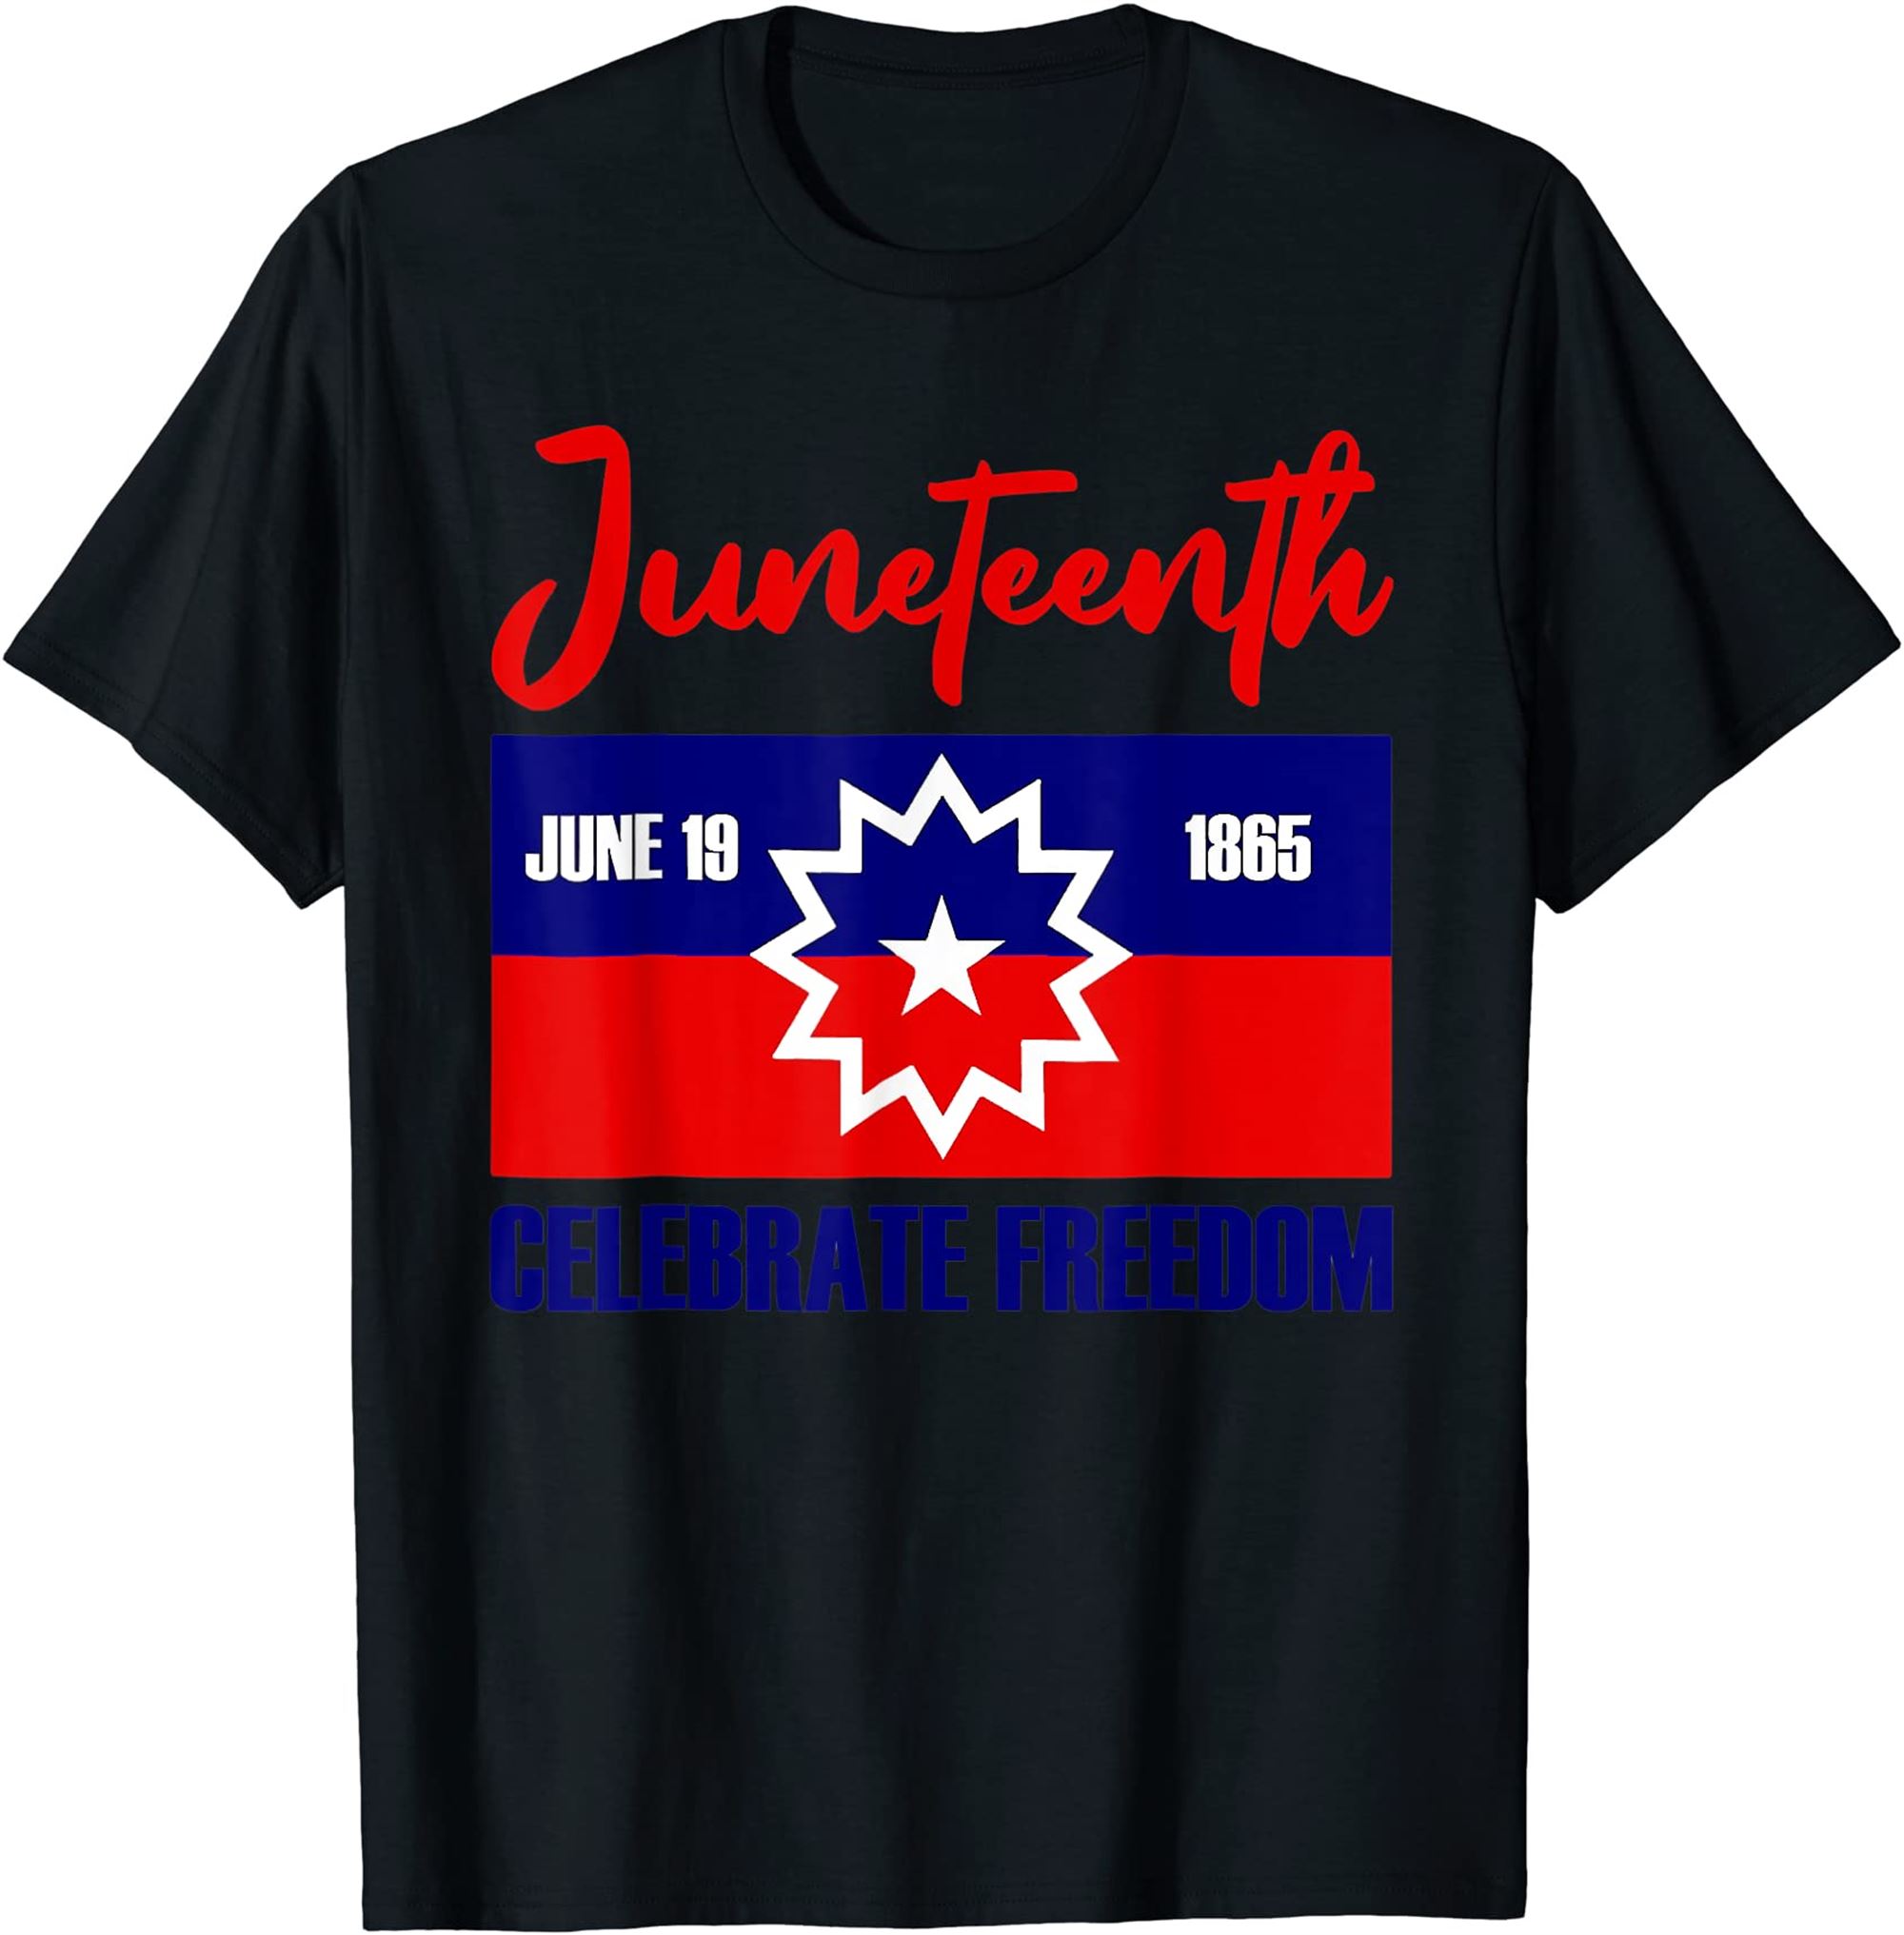 Juneteenth Celebrate Freedom Red White Blue Free Black Slave T-shirt Size Up To 5xl